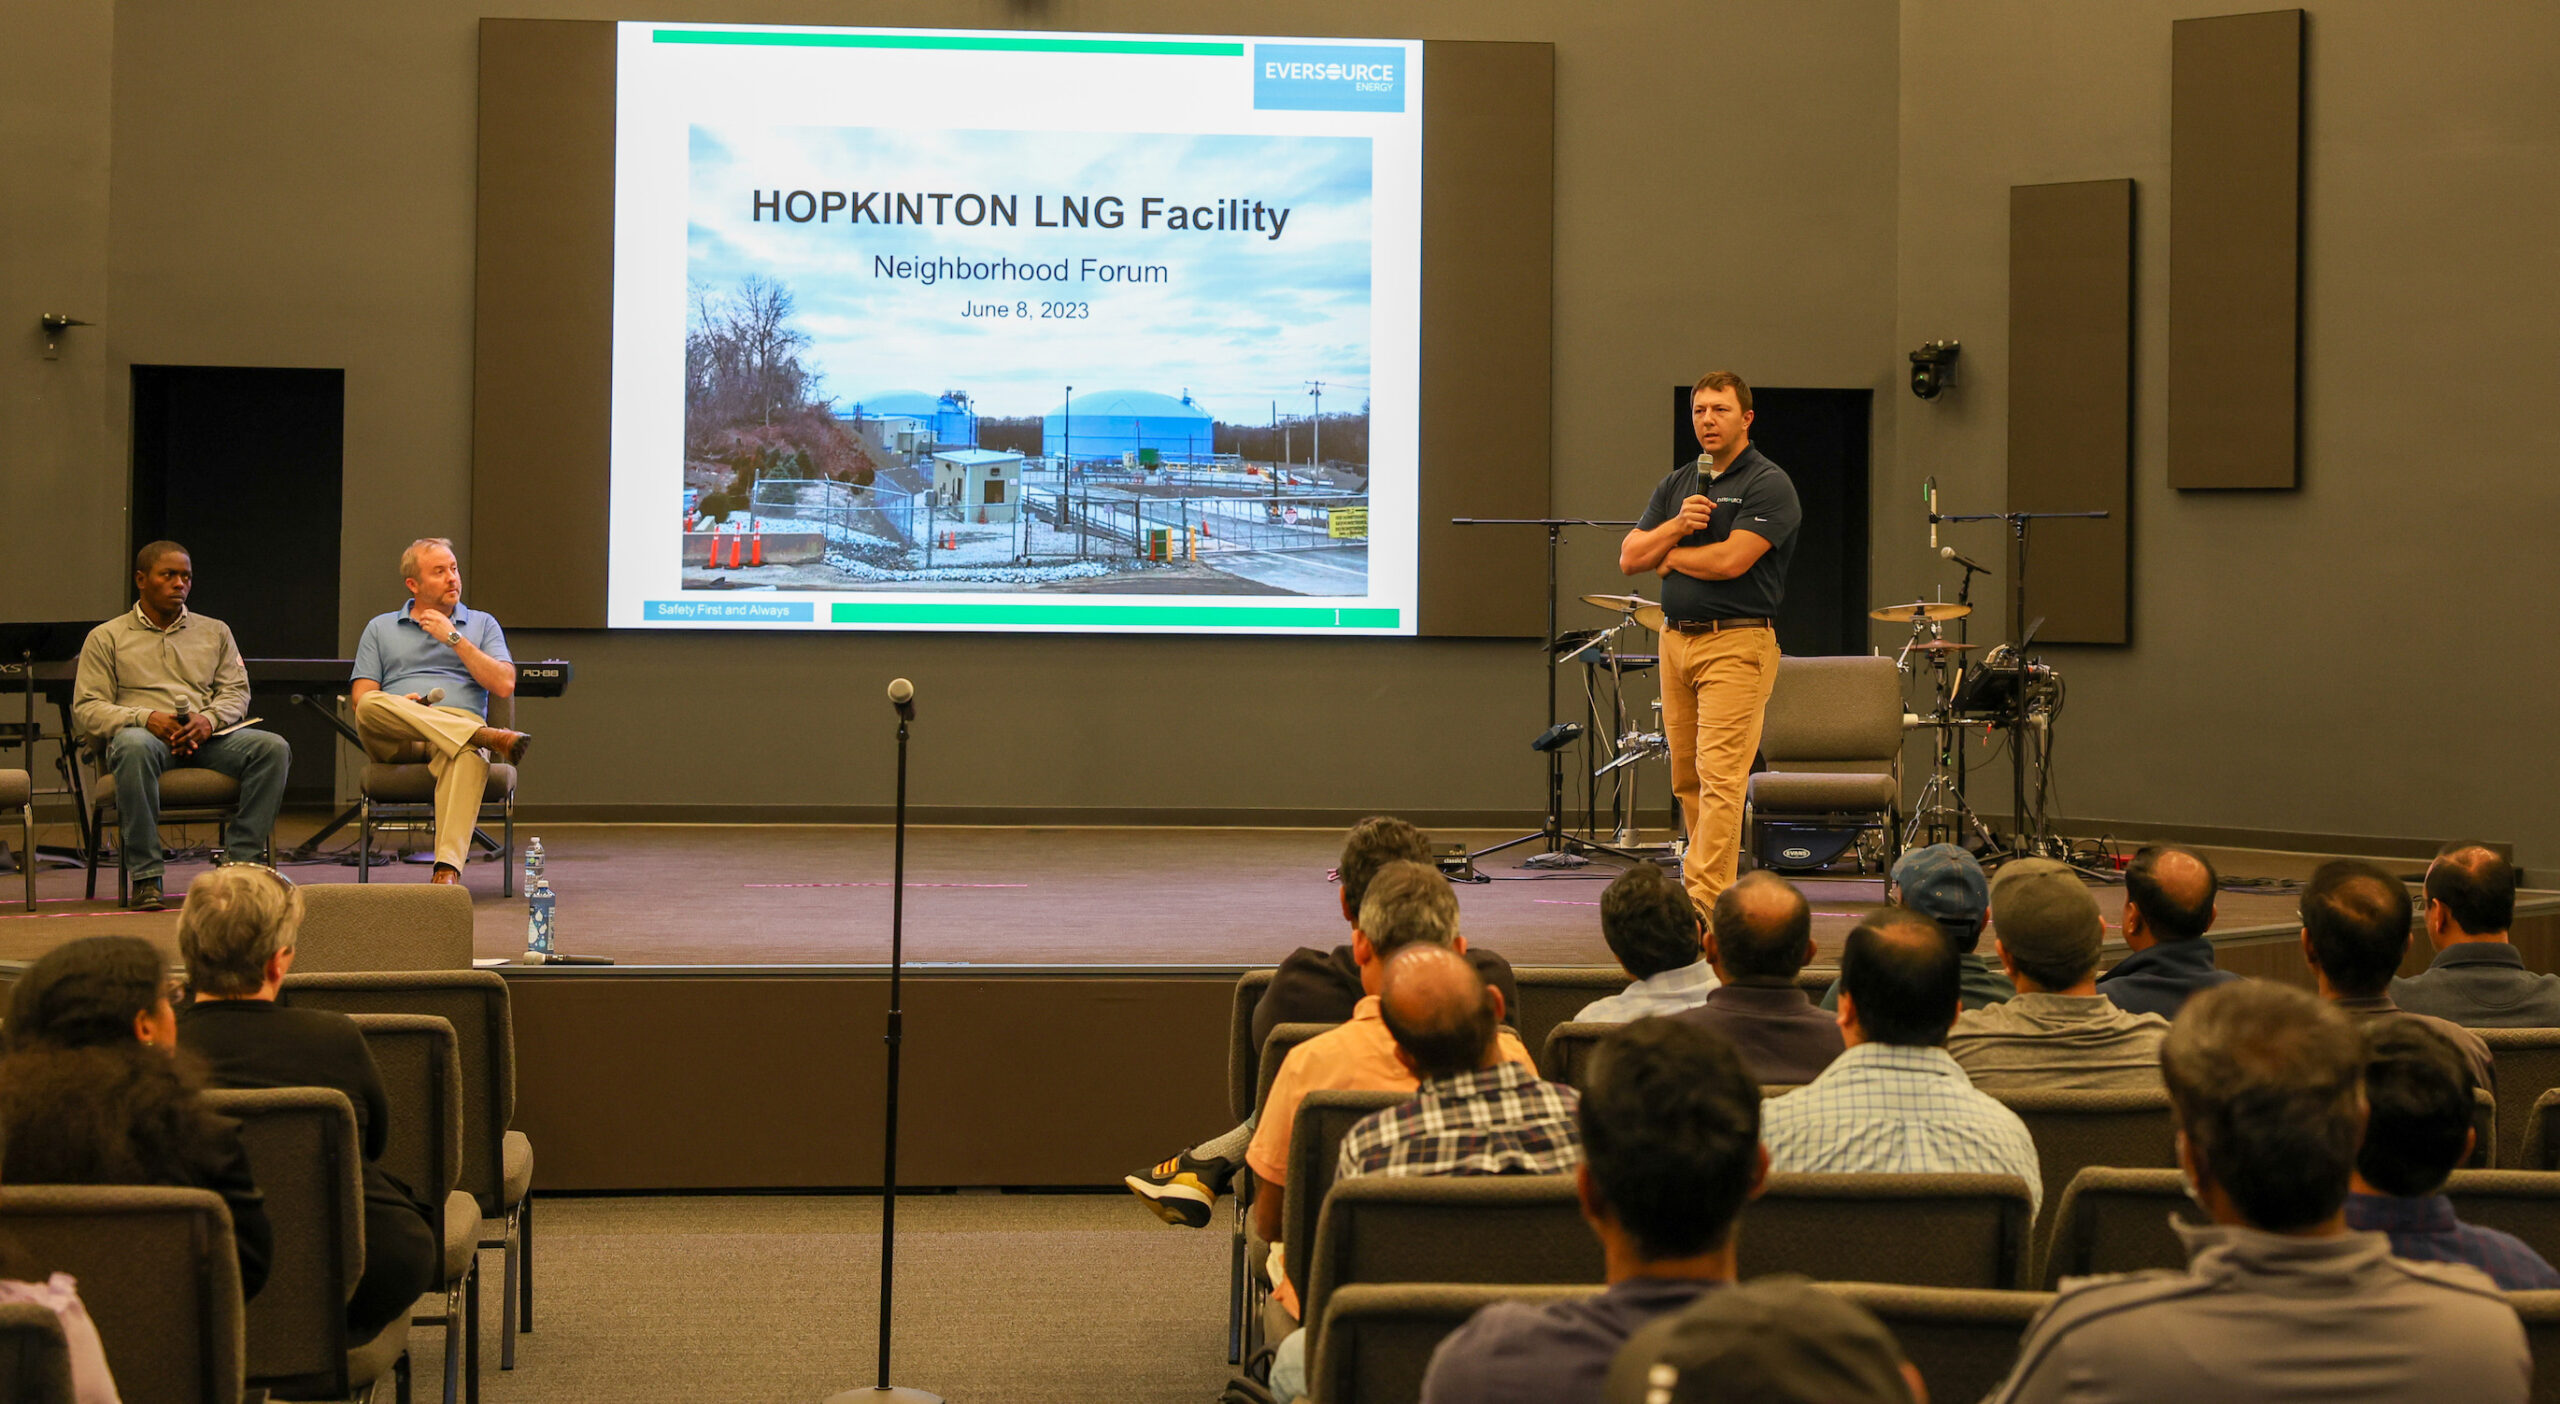 Eversource addresses concerns about LNG plant safety at public forum